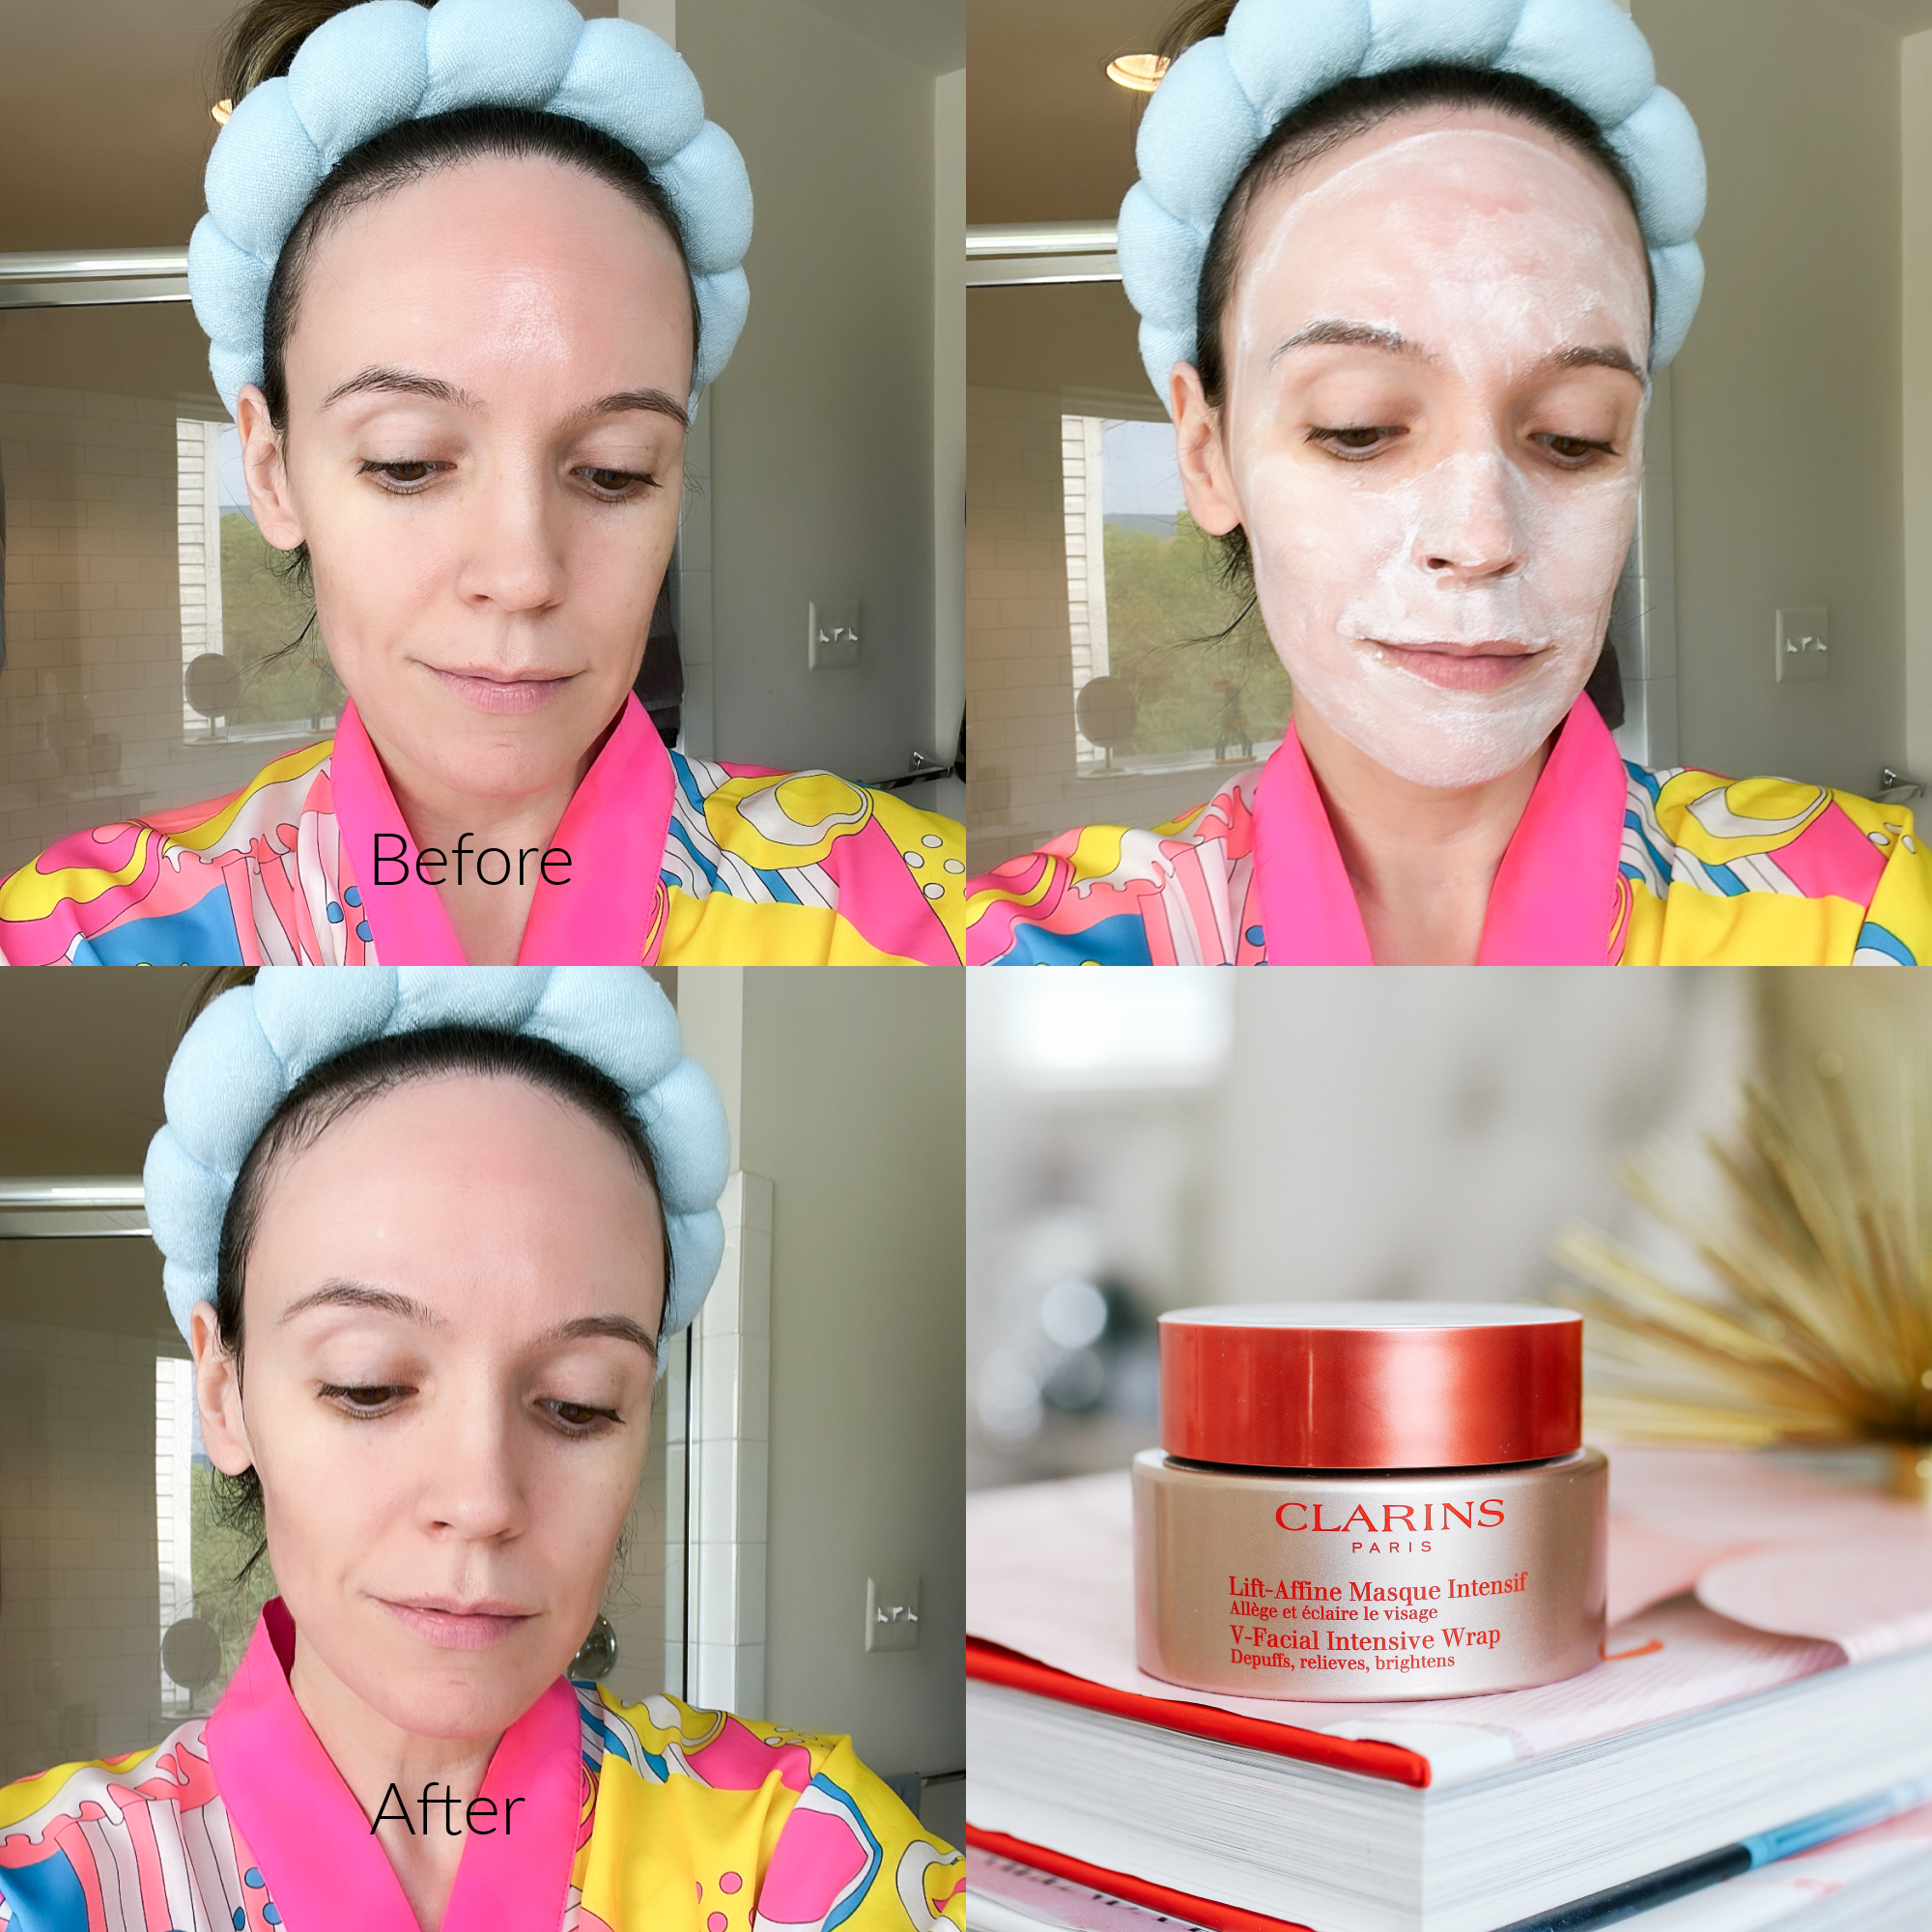 Clarins DePuffing Face Mask before and after